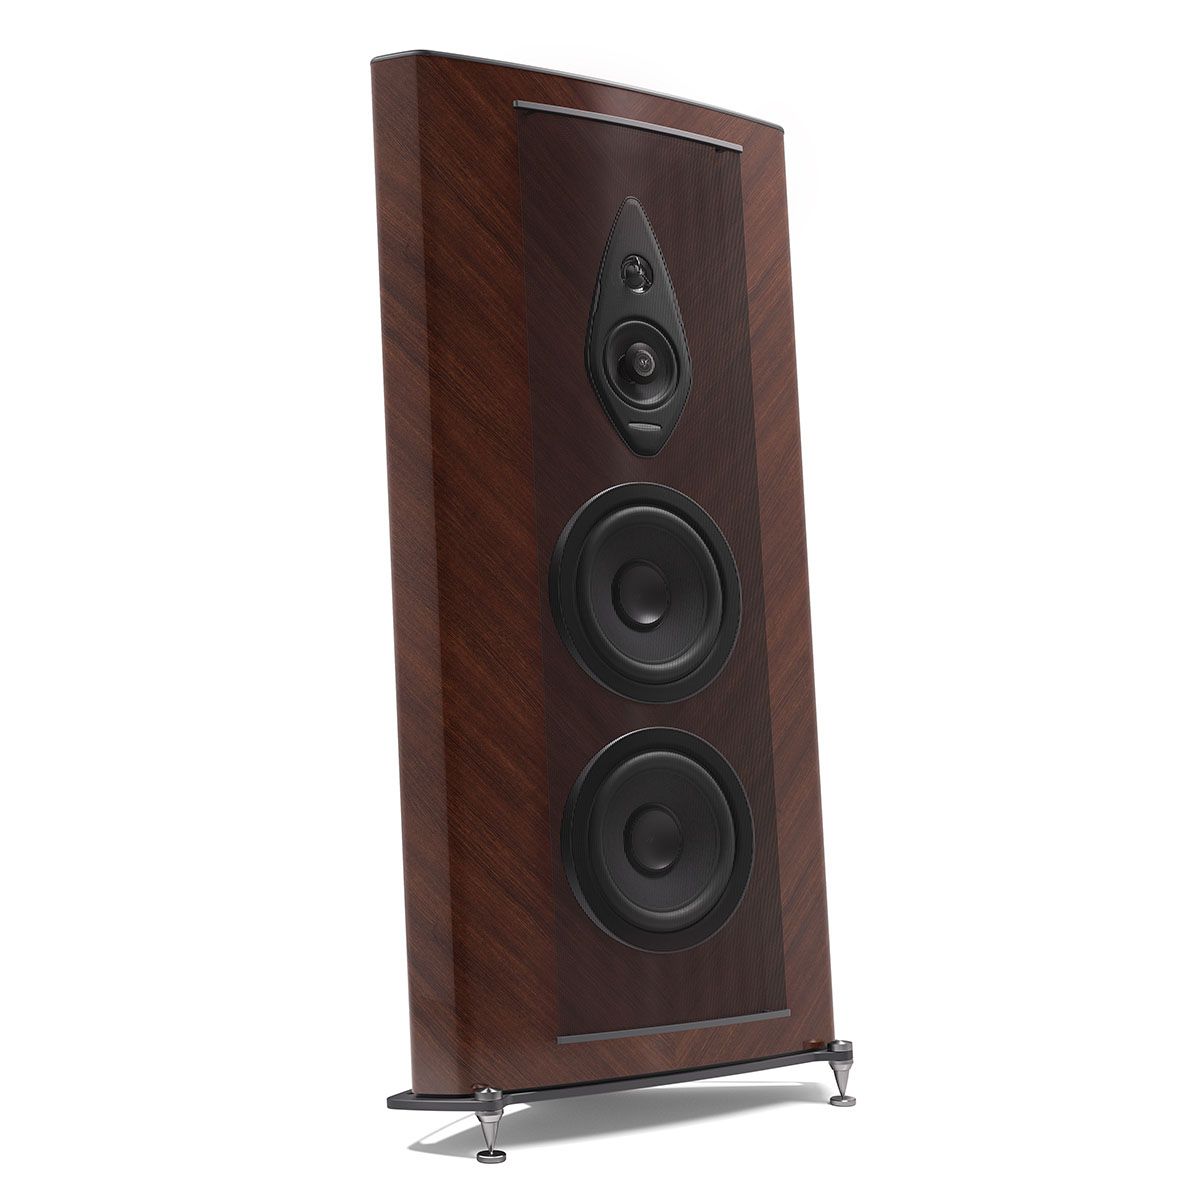 Sonus Faber Stradivari Gen2 - Wenge High Gloss - Pair angled front view with grille